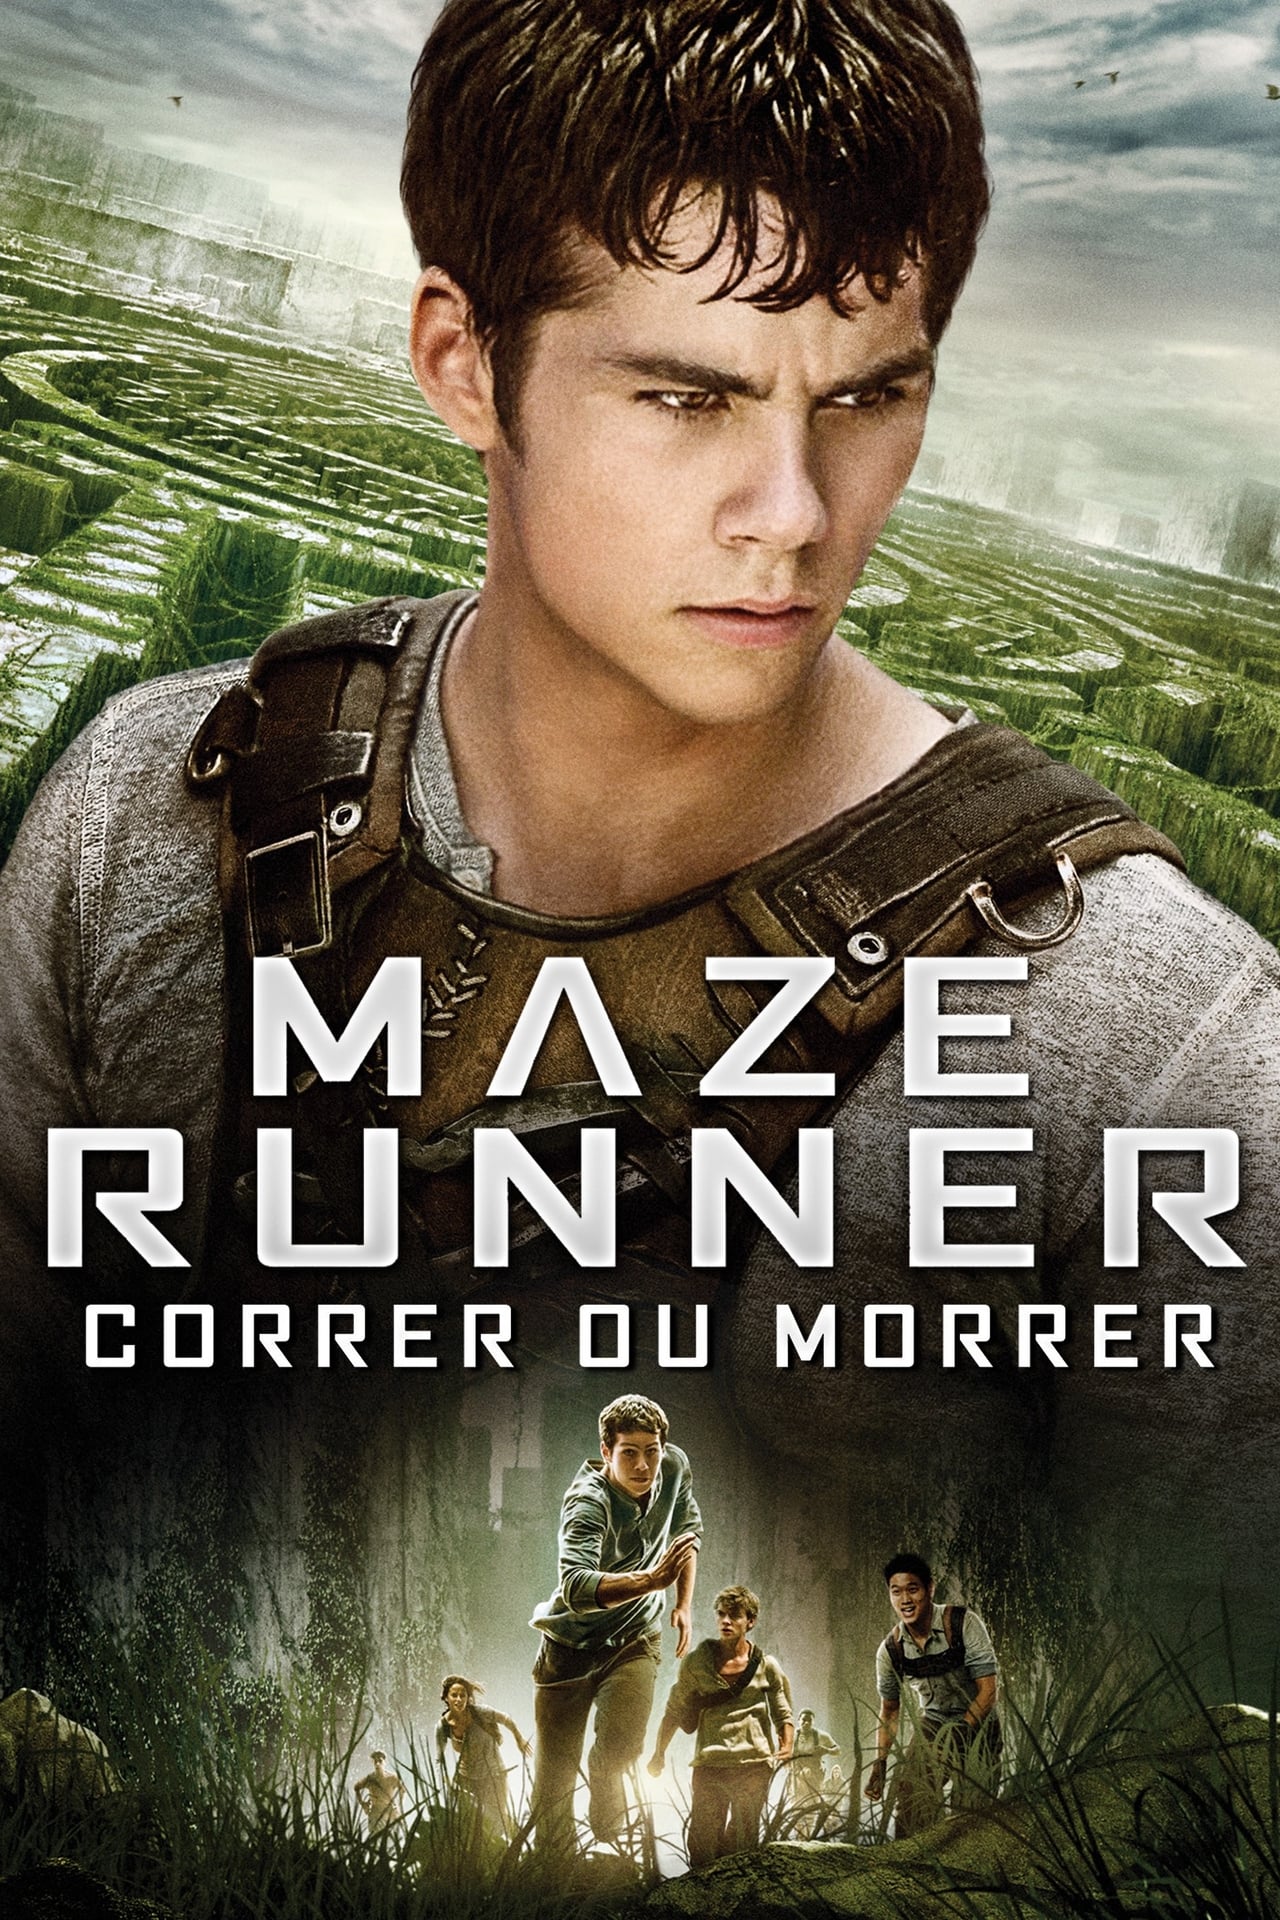 Watch Streaming The Maze Runner (2014) Online Full Movie at get